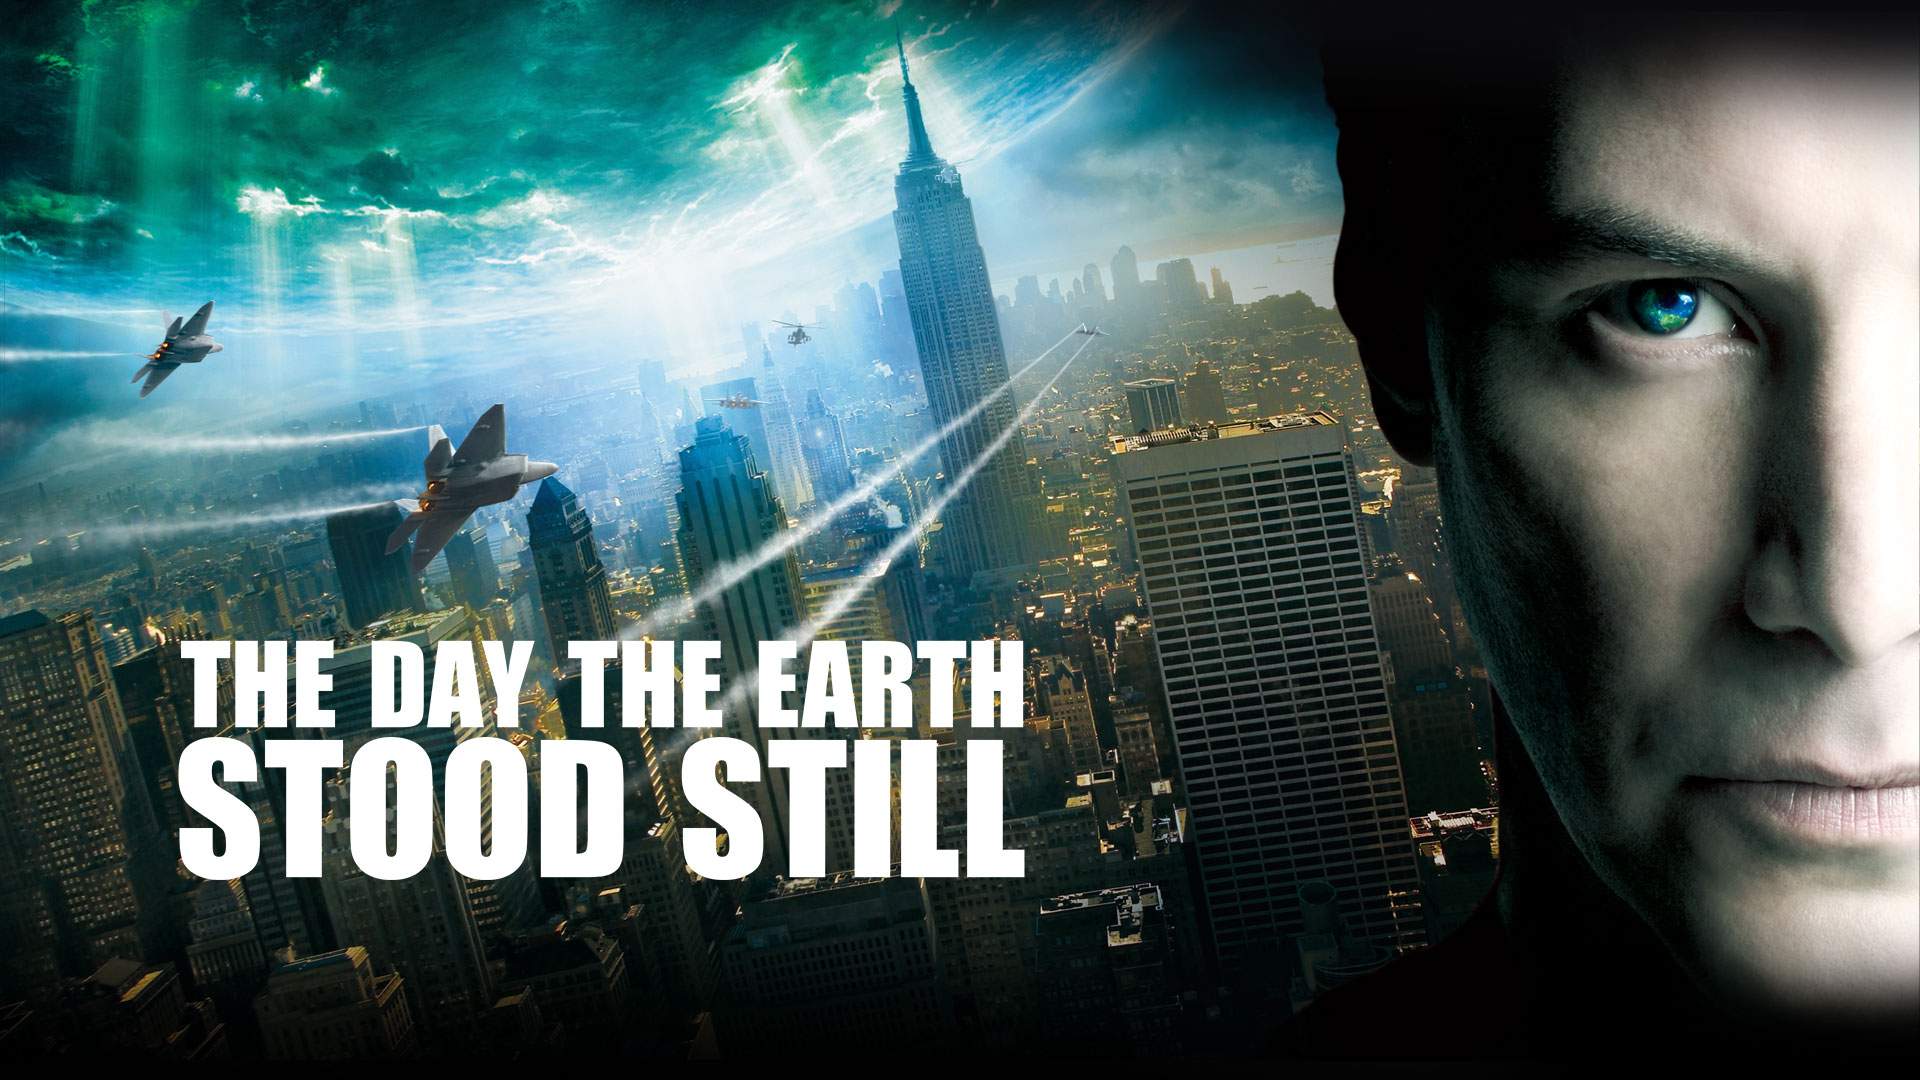 42-facts-about-the-movie-the-day-the-earth-stood-still